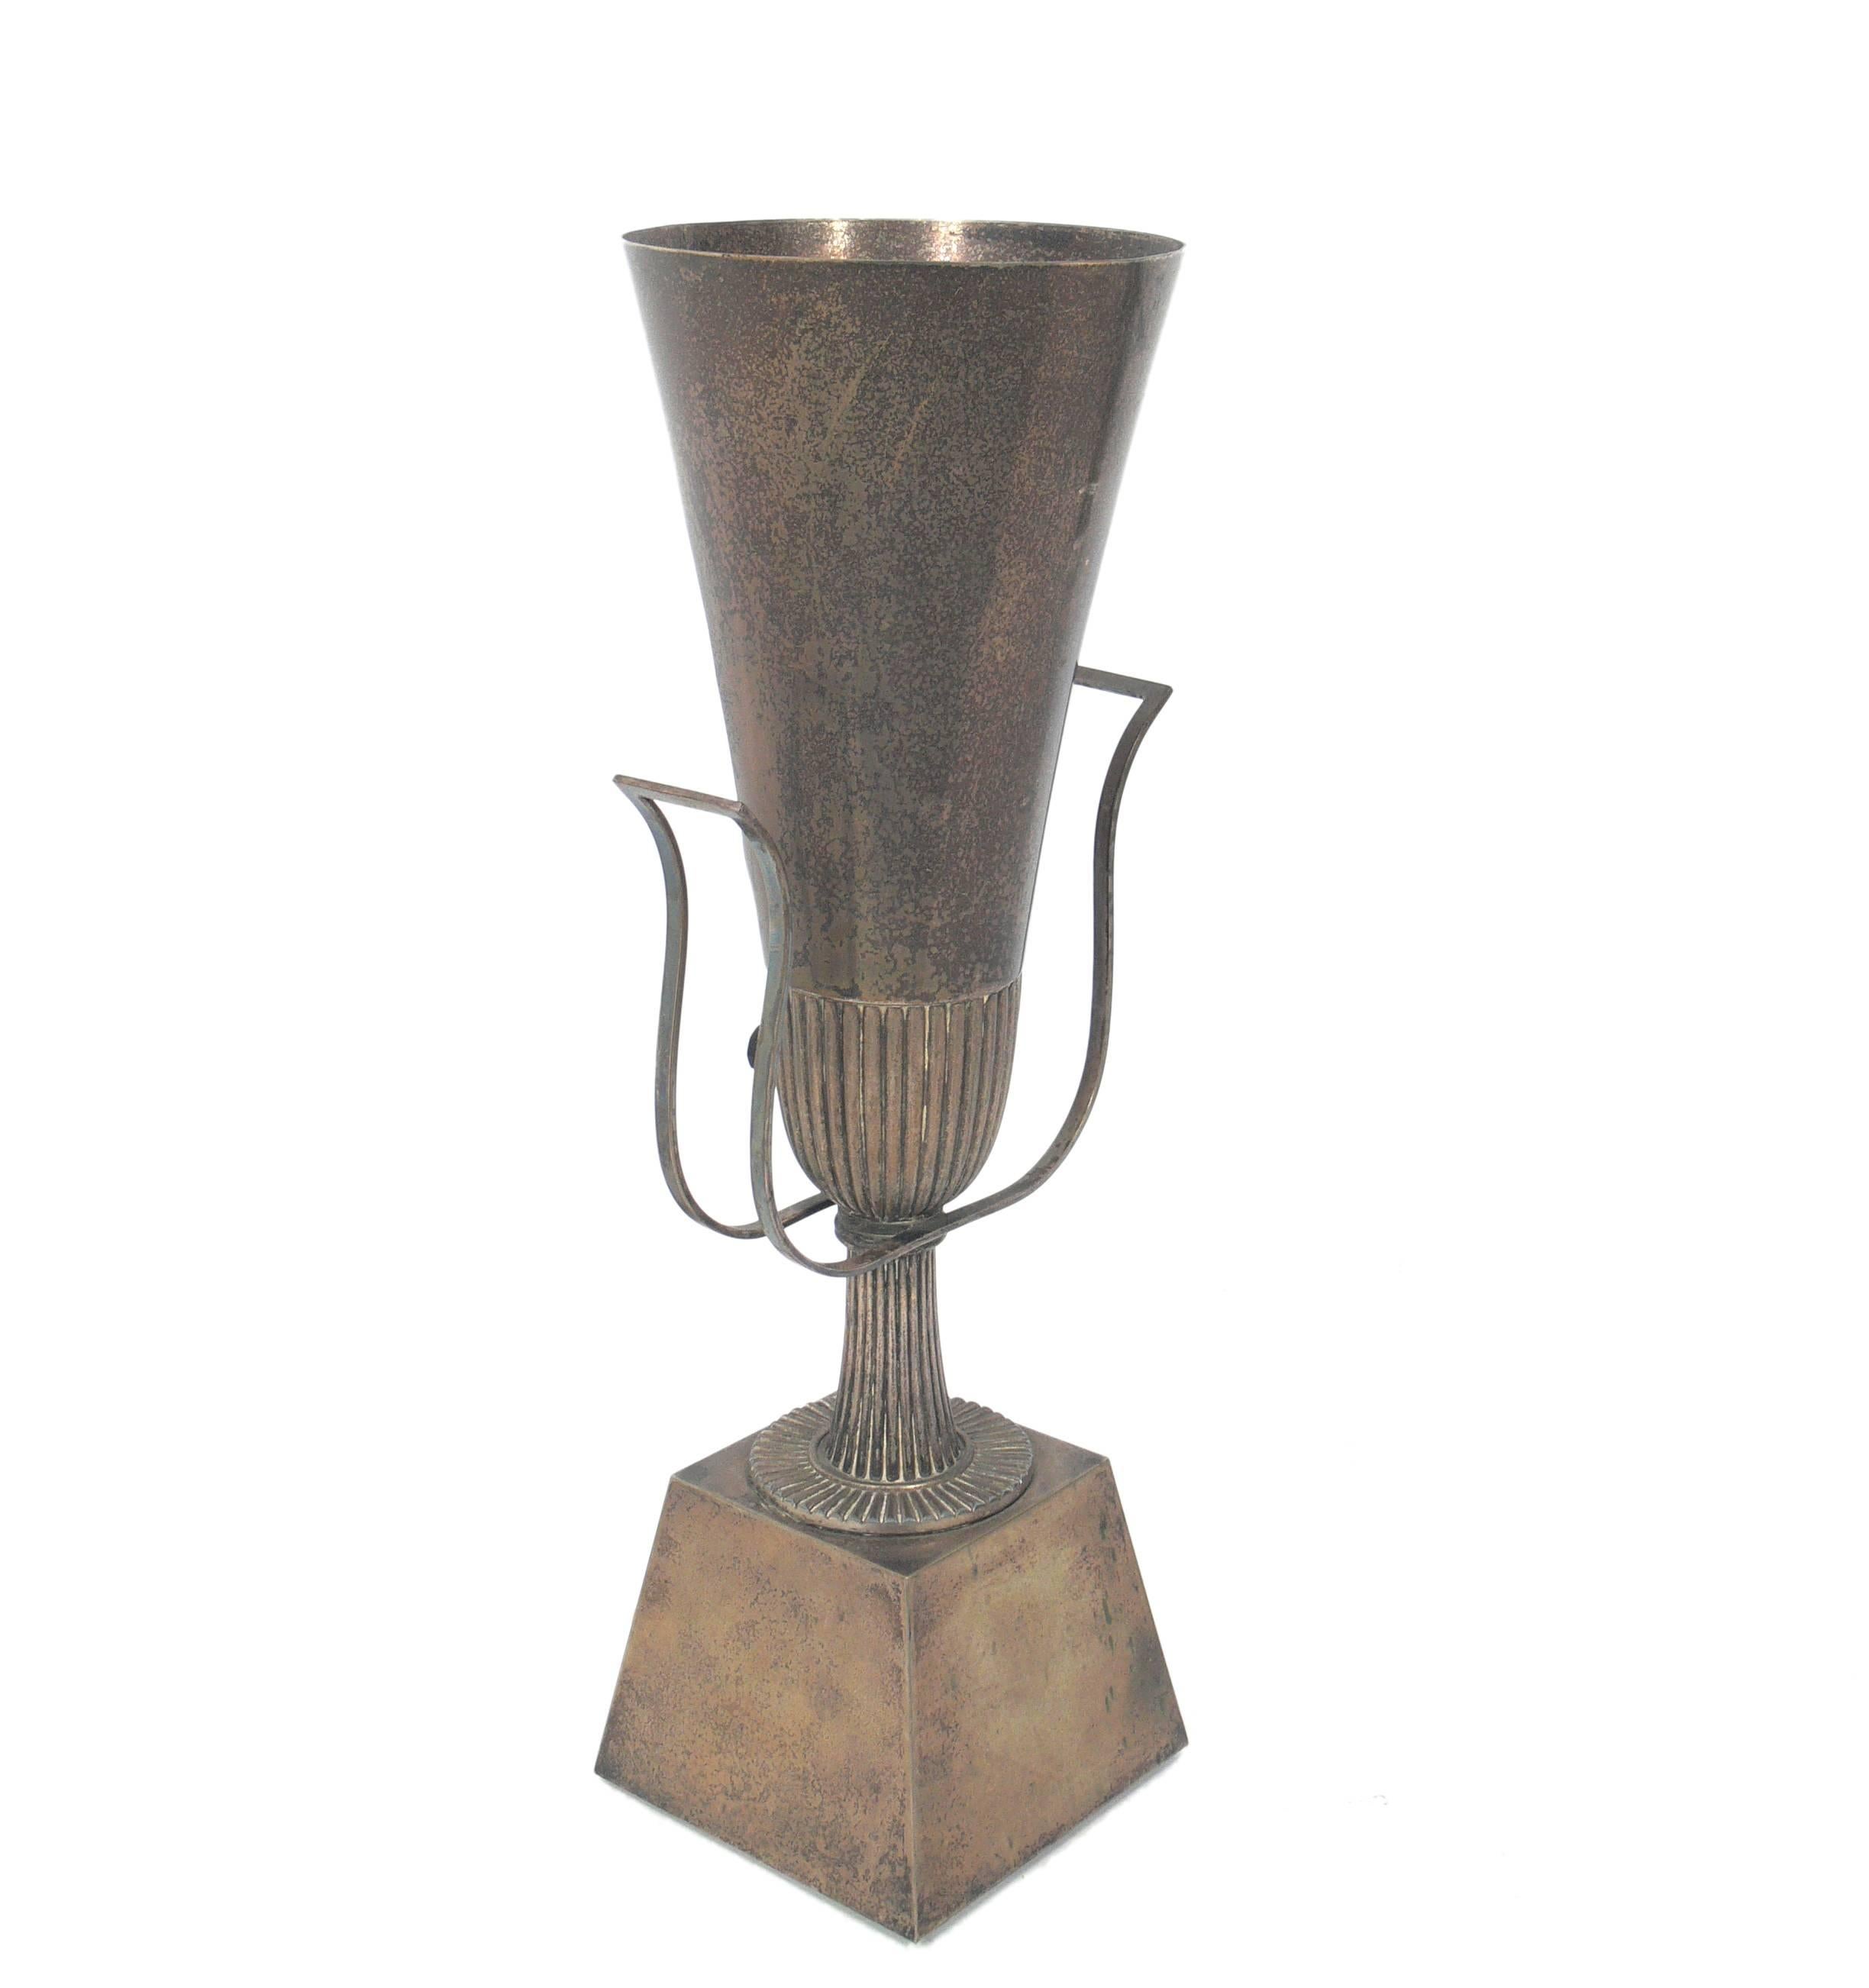 Elegant silver plated urn lamp, designed by Tommi Parzinger, American, circa 1950s. This example allows both uplight and backlit. Retains warm original patina. Rewired and ready to use.